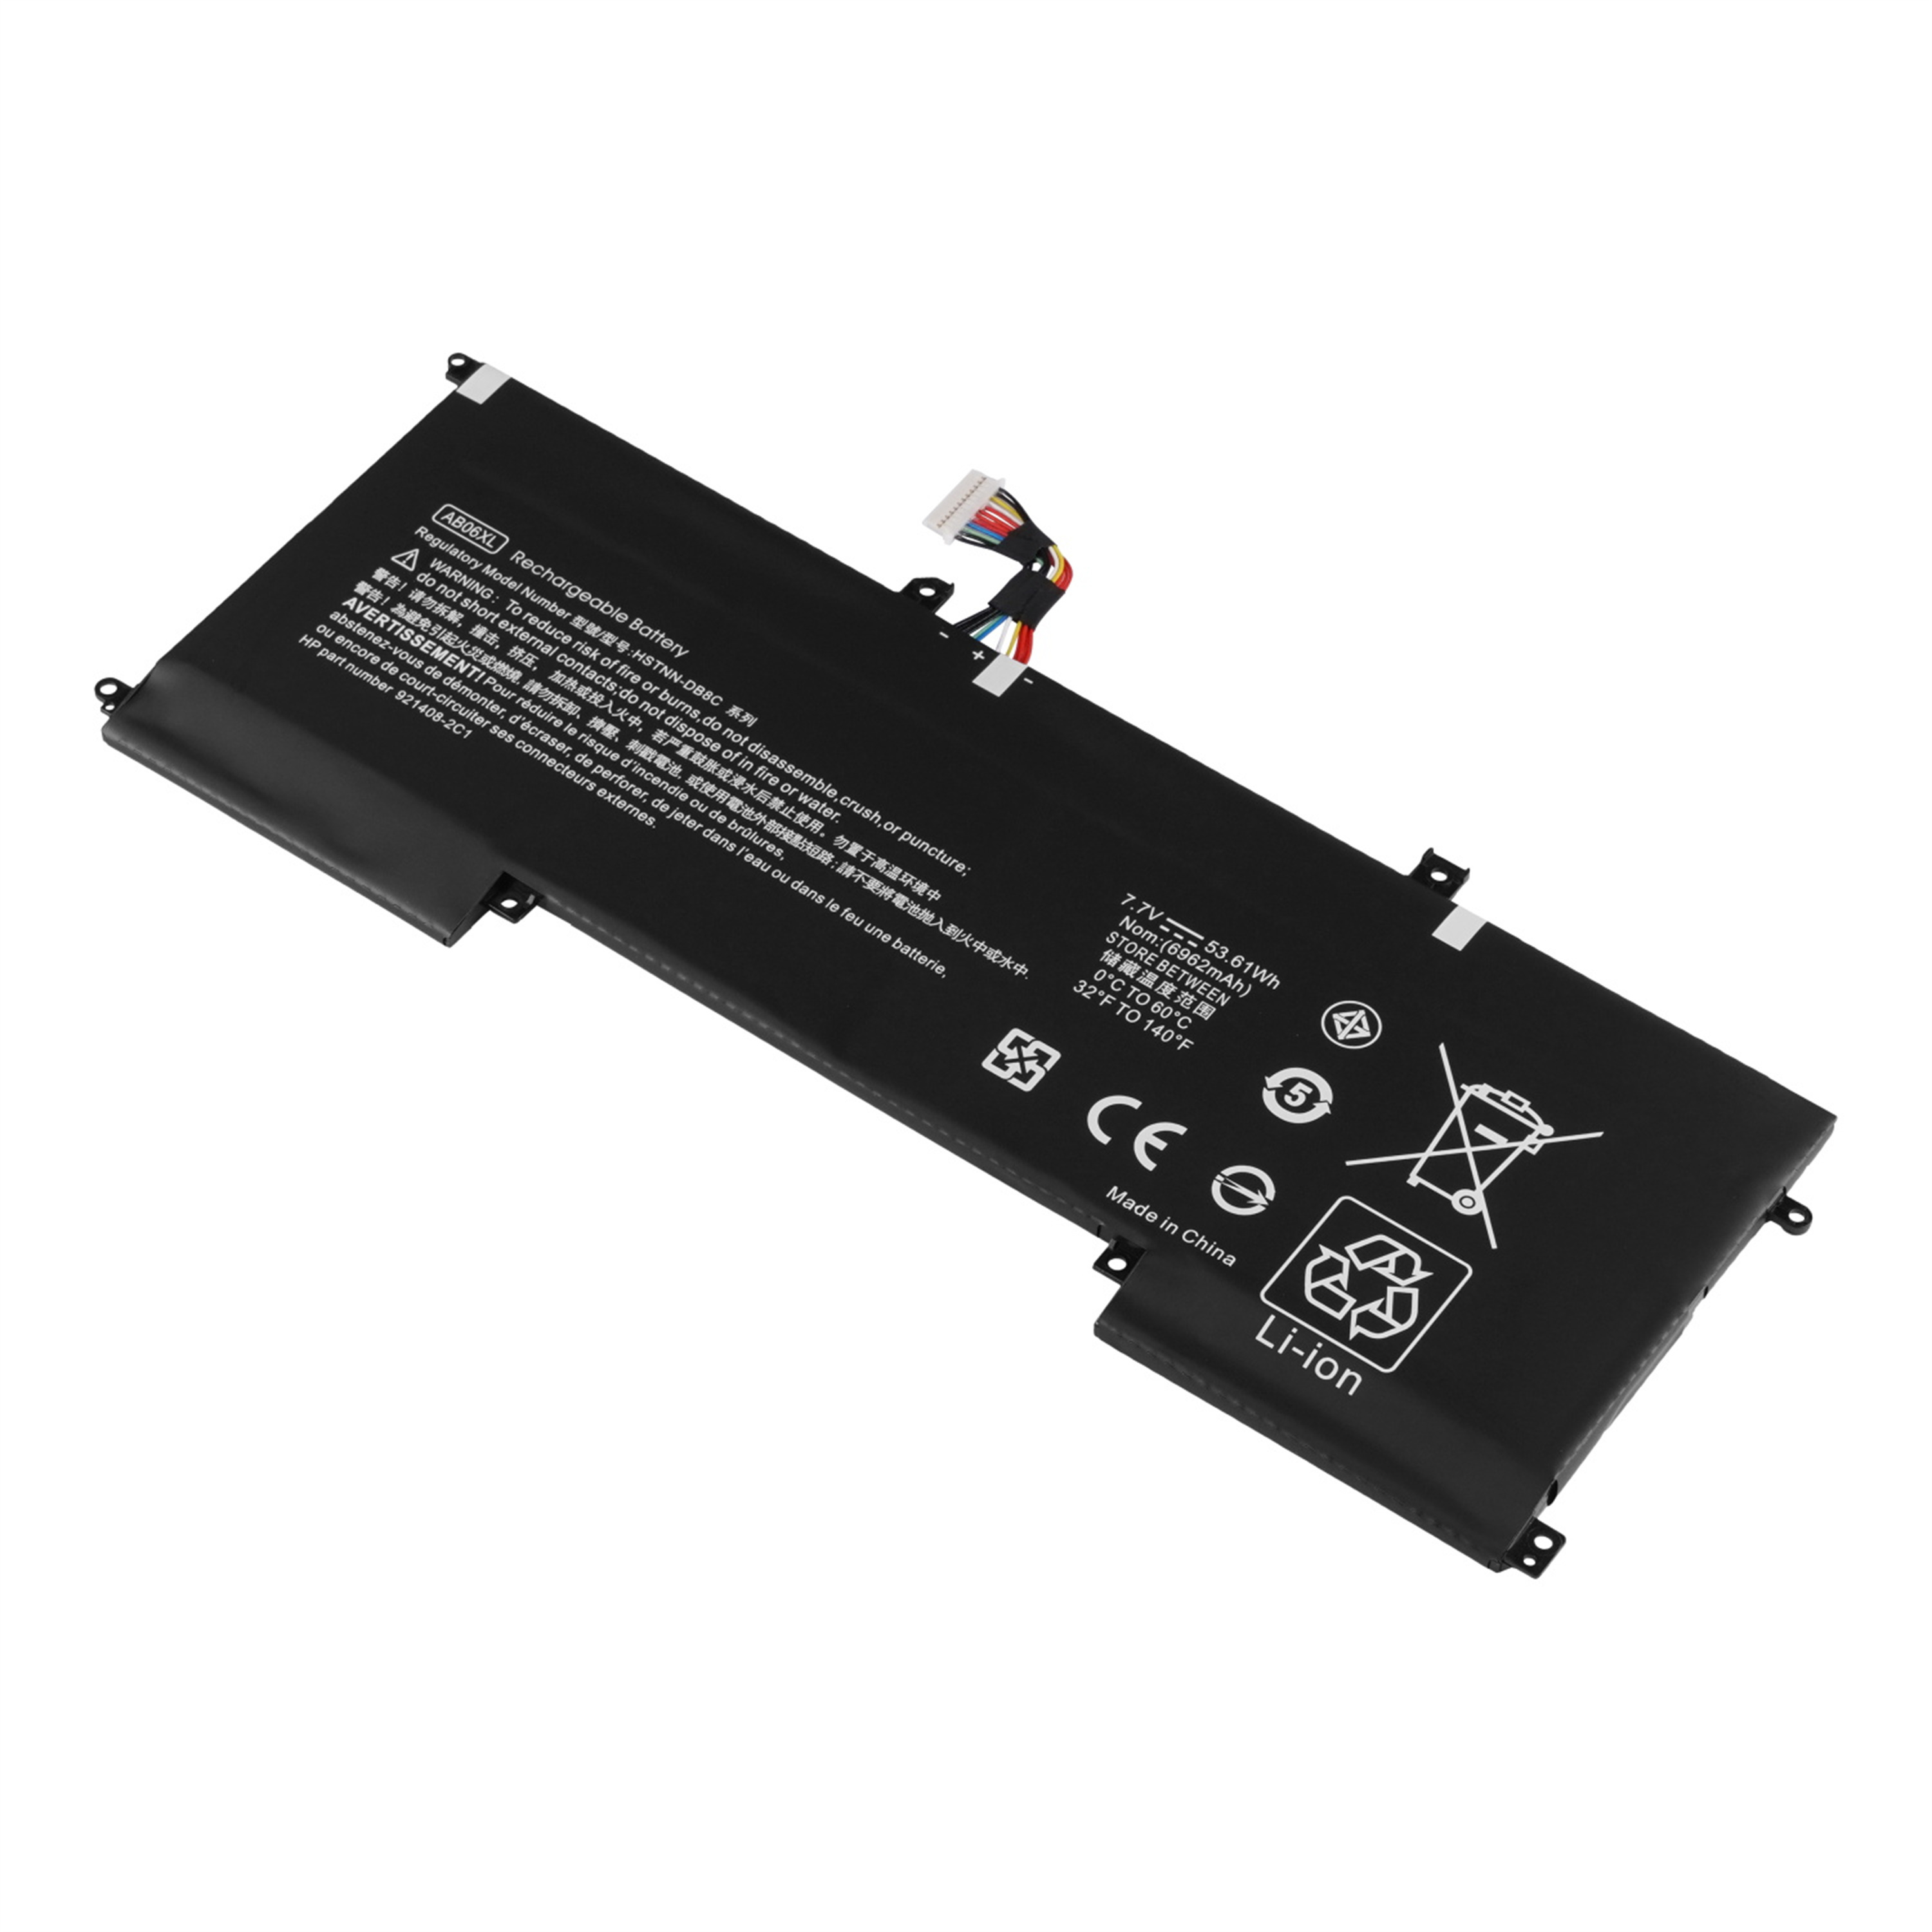 AB06XL rechargeable lithium ion Notebook battery Laptop battery AB06XL 921408-2C1 921438-855 TPN-I128 HSTNN-DB8C TPNI128 7.7V 53.6Wh for HP laptop Envy 13 2017 13-AD019TU 13-AD022TU 13-AD023TU